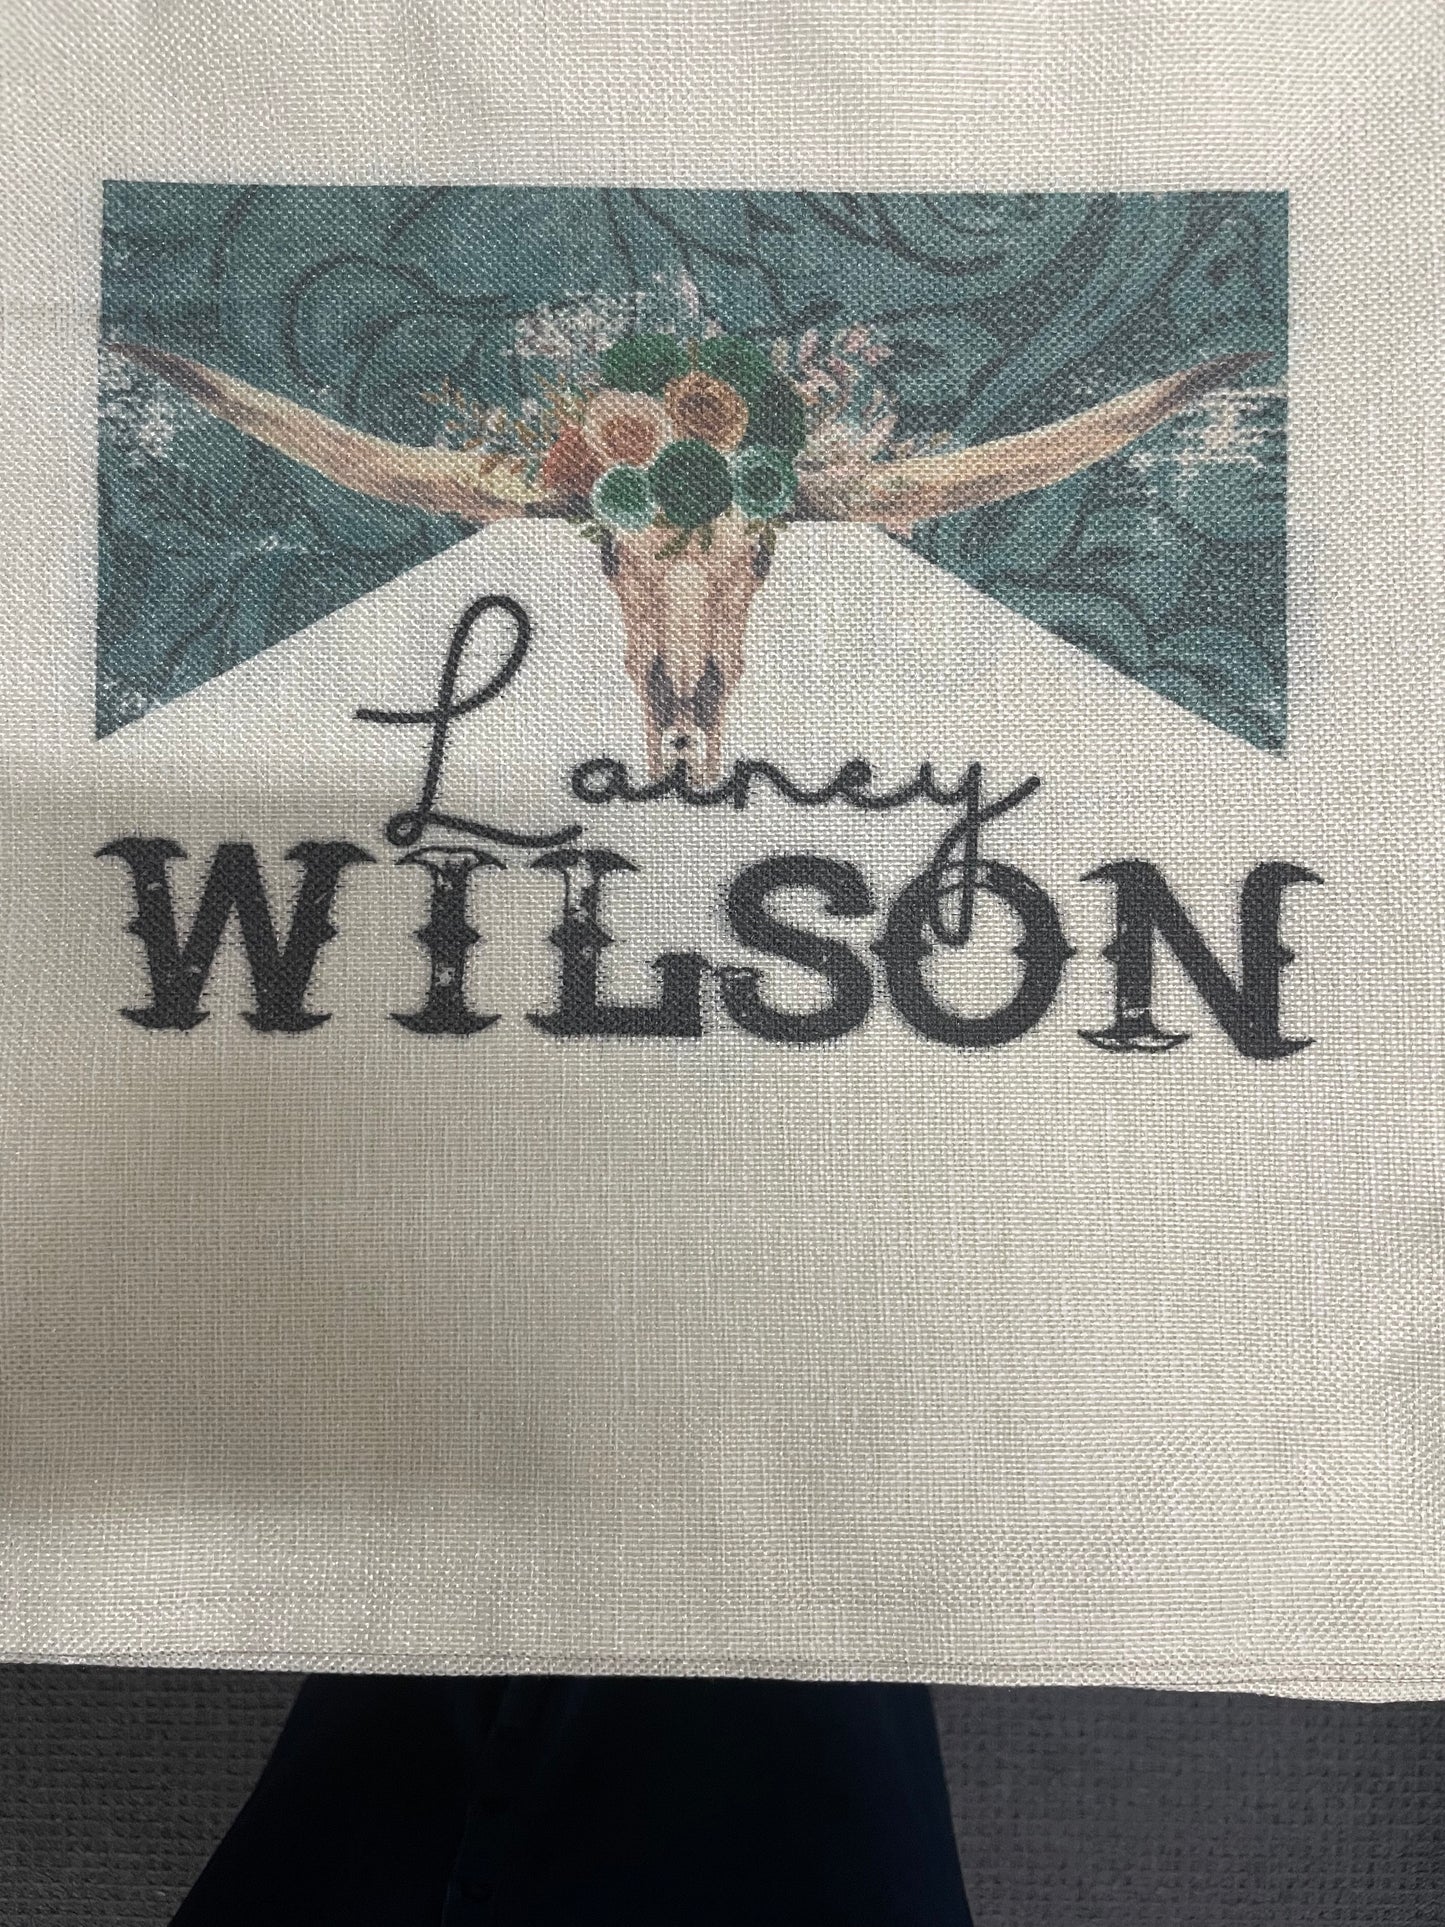 KD Country Cushion - Lainey Wilson